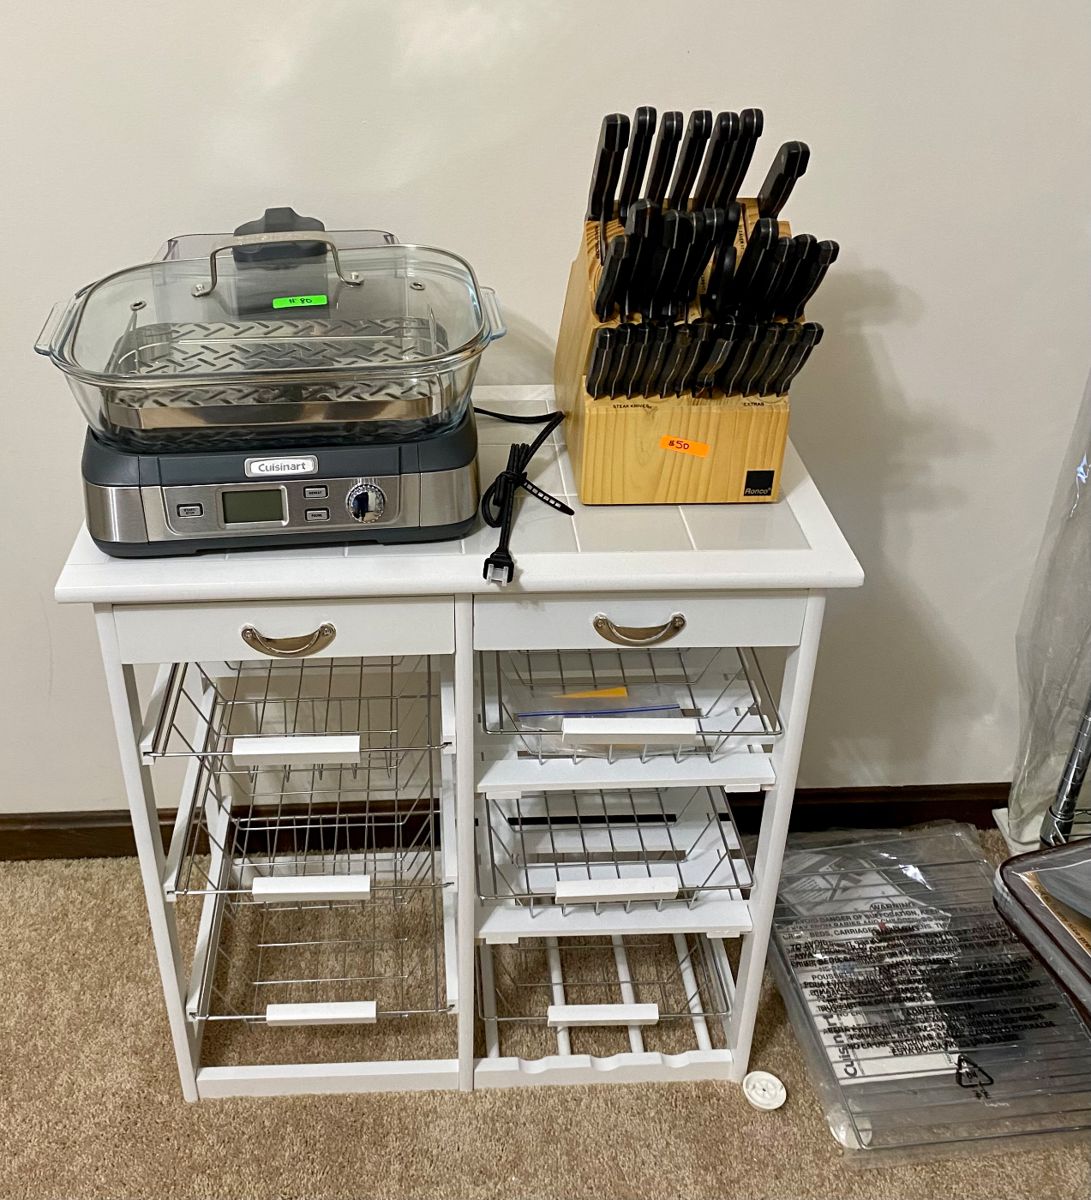 Like new Cuisinart steamer, huge Ronca knife block with all knives, and a cute kitchen stand